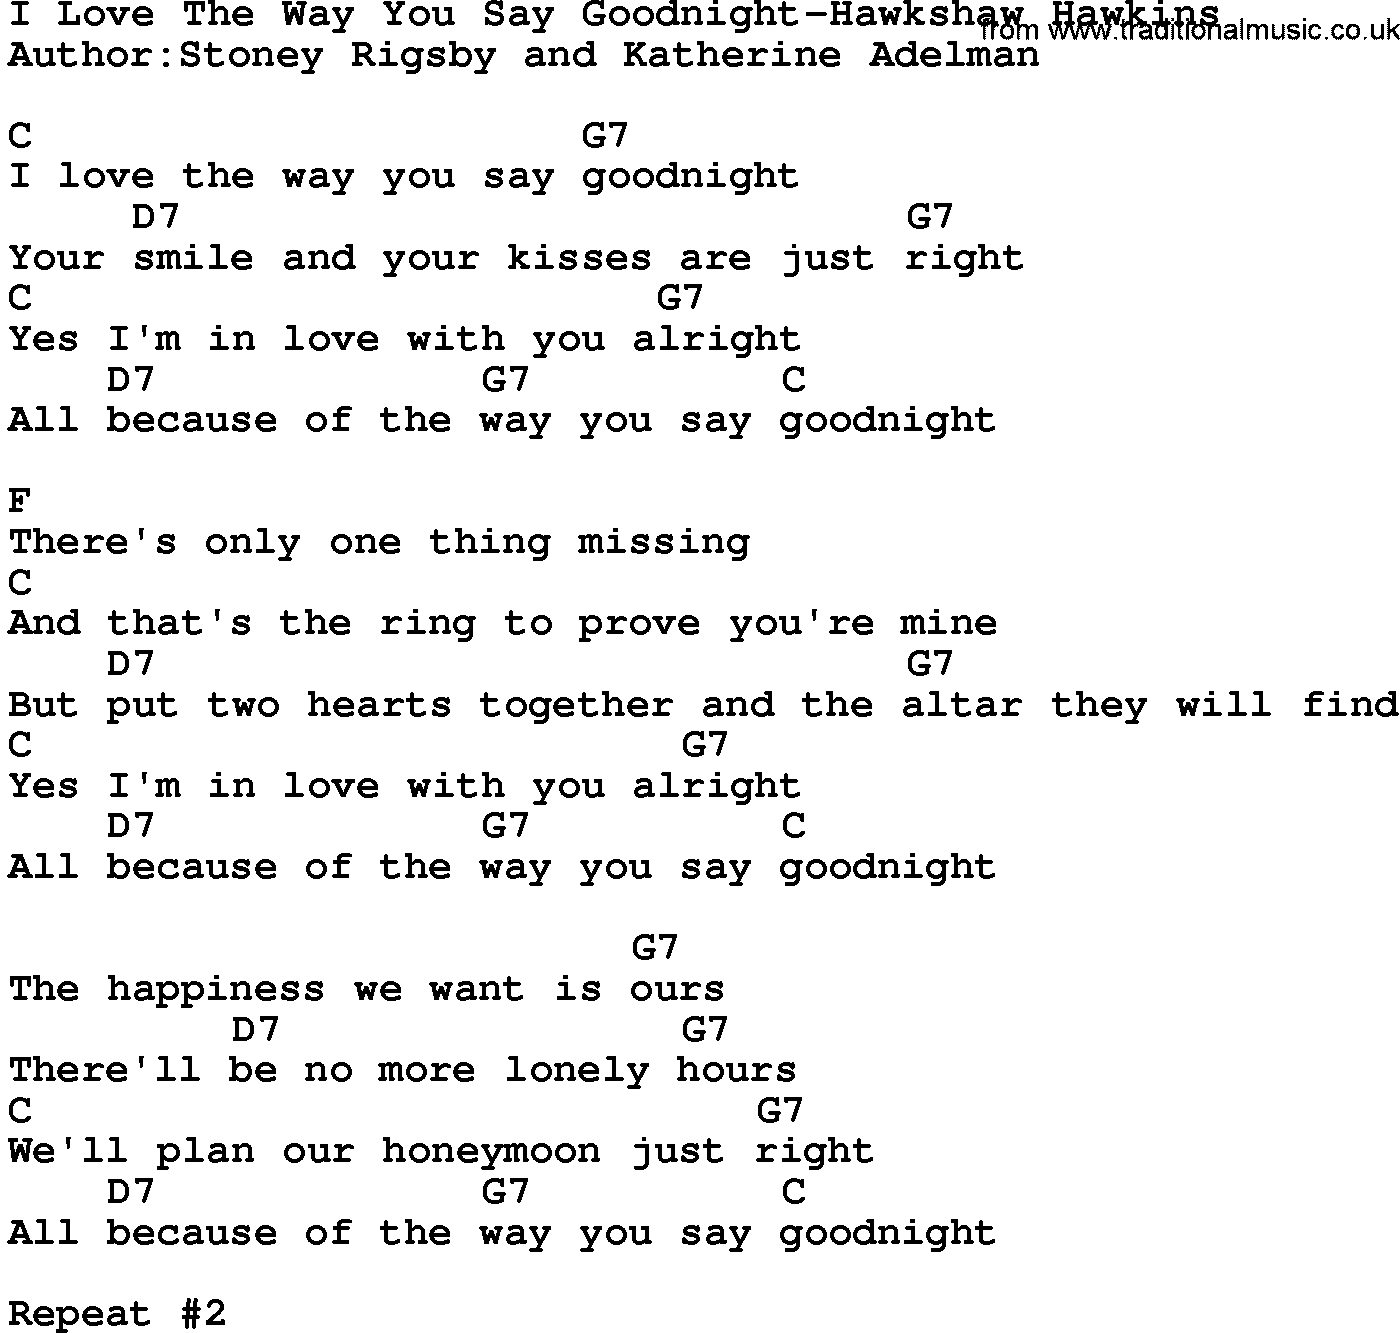 Country music song: I Love The Way You Say Goodnight-Hawkshaw Hawkins lyrics and chords